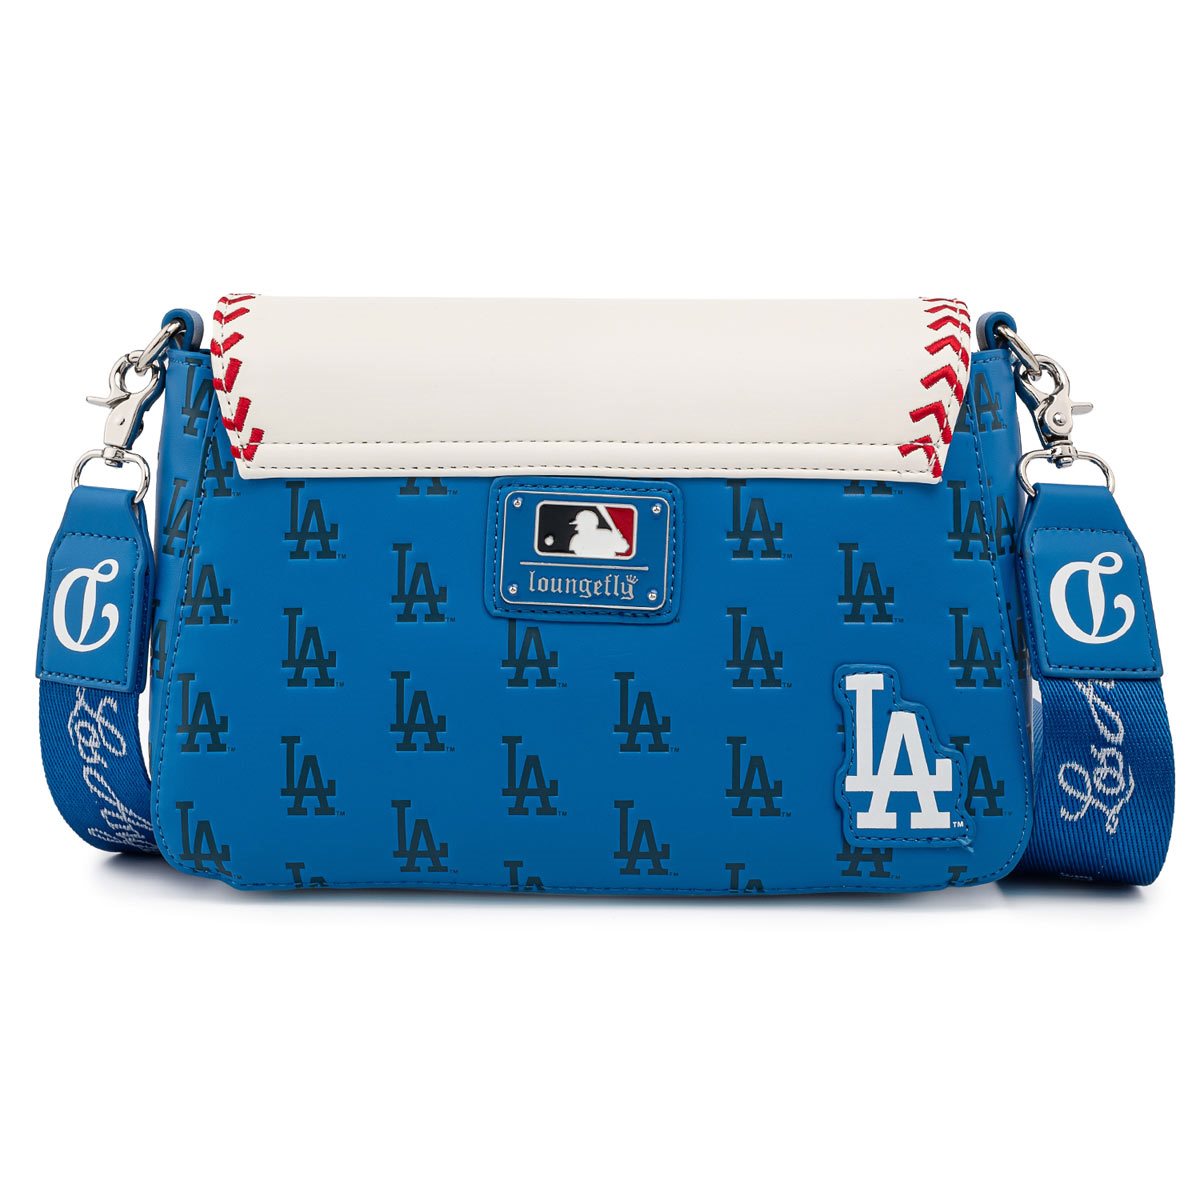 Officially Licensed MLB Pebble Smart Purse - Los Angeles Dodgers